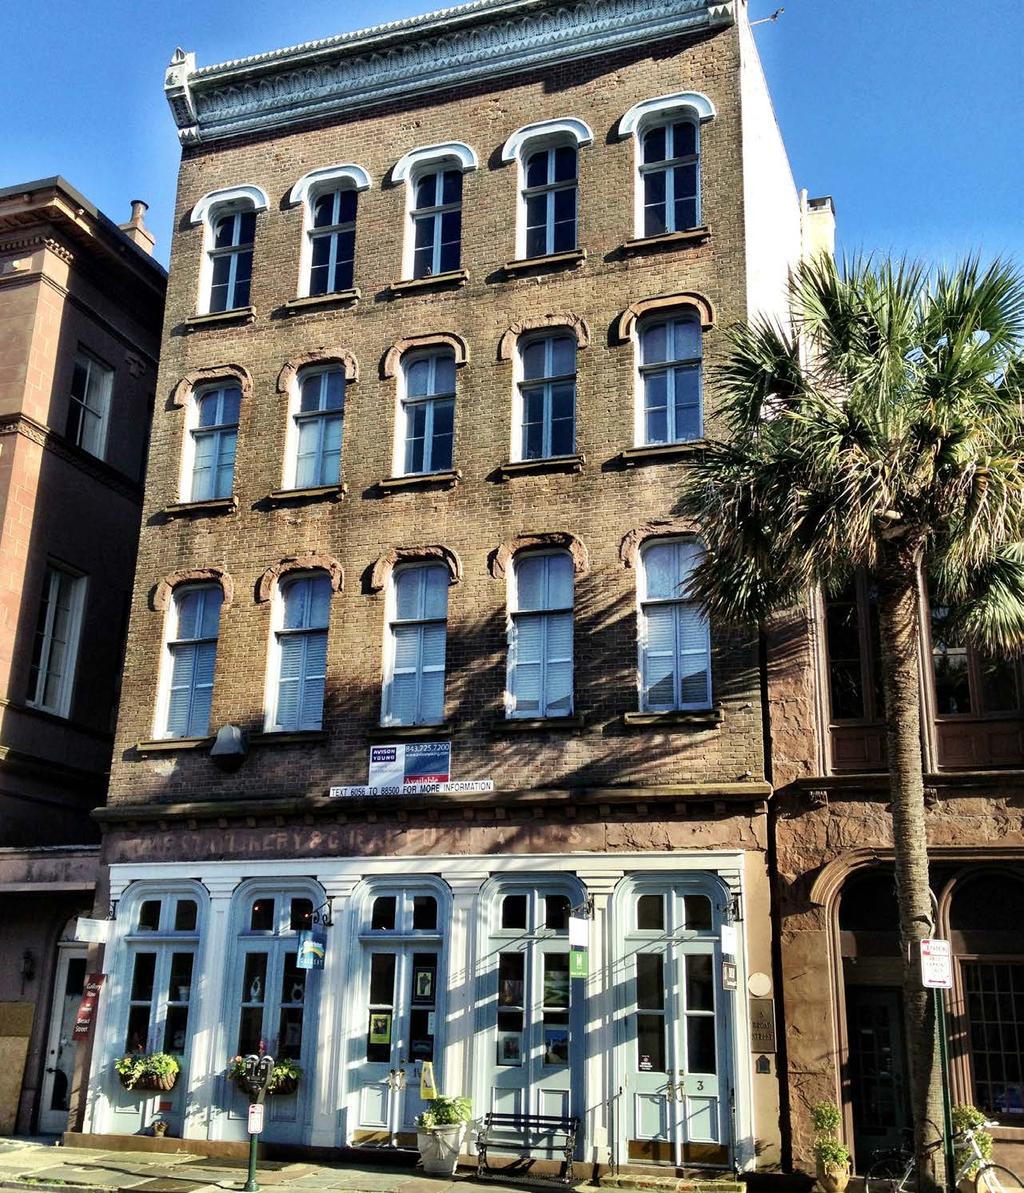 3 BROAD STREET Charleston, SC 29401 FOR LEASE Jeremy